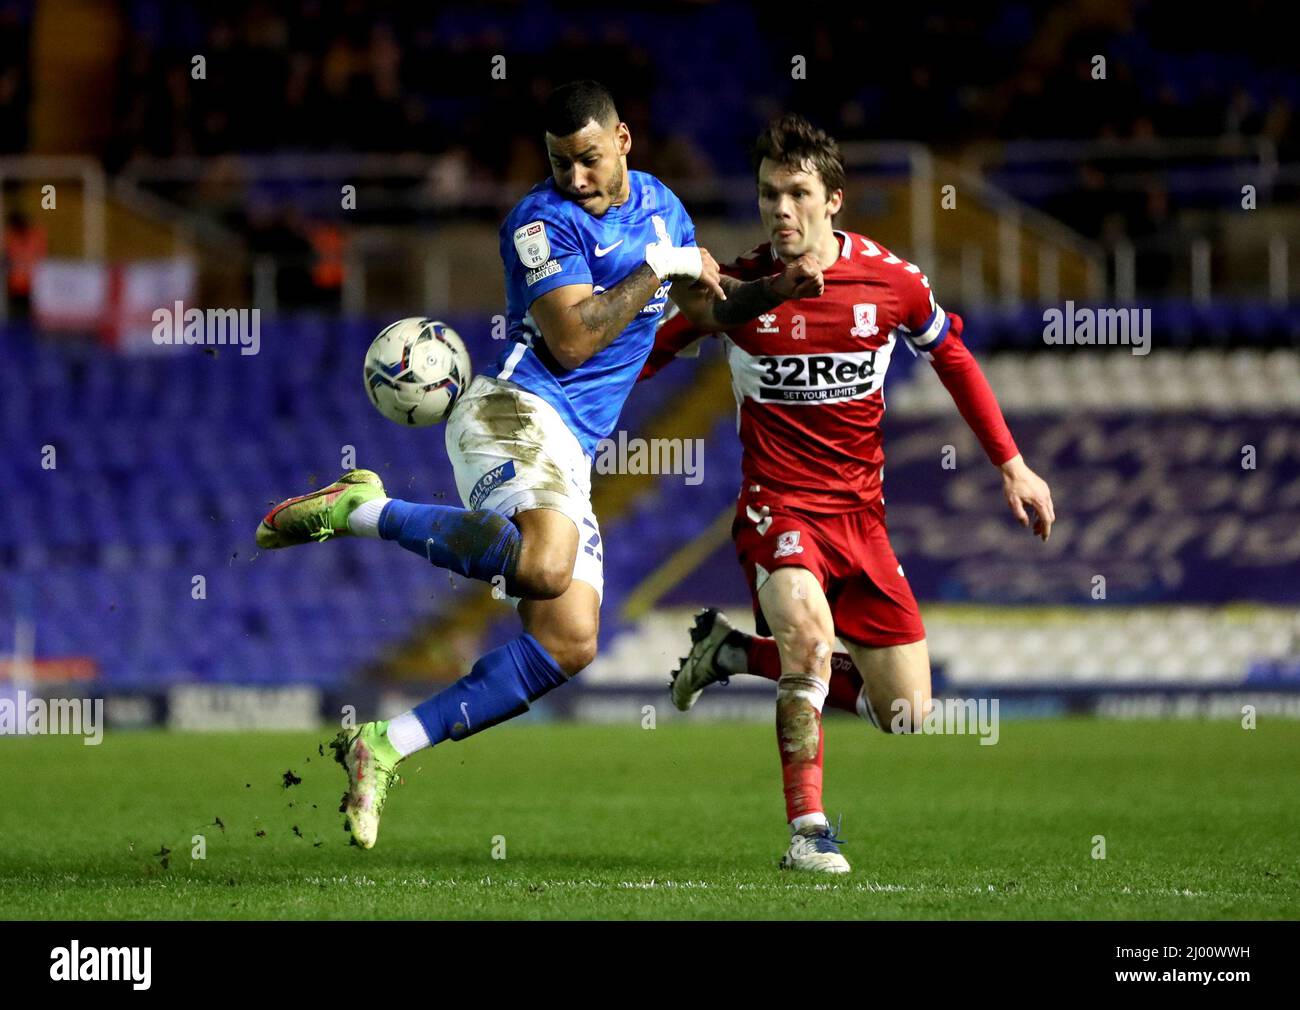 Birmingham City's Onel Hernandez (left) controls the ball under pressure from Middlesbrough's Jonny Howson during the Sky Bet Championship match at St. Andrew's, Birmingham. Picture date: Tuesday March 15, 2022. Stock Photo